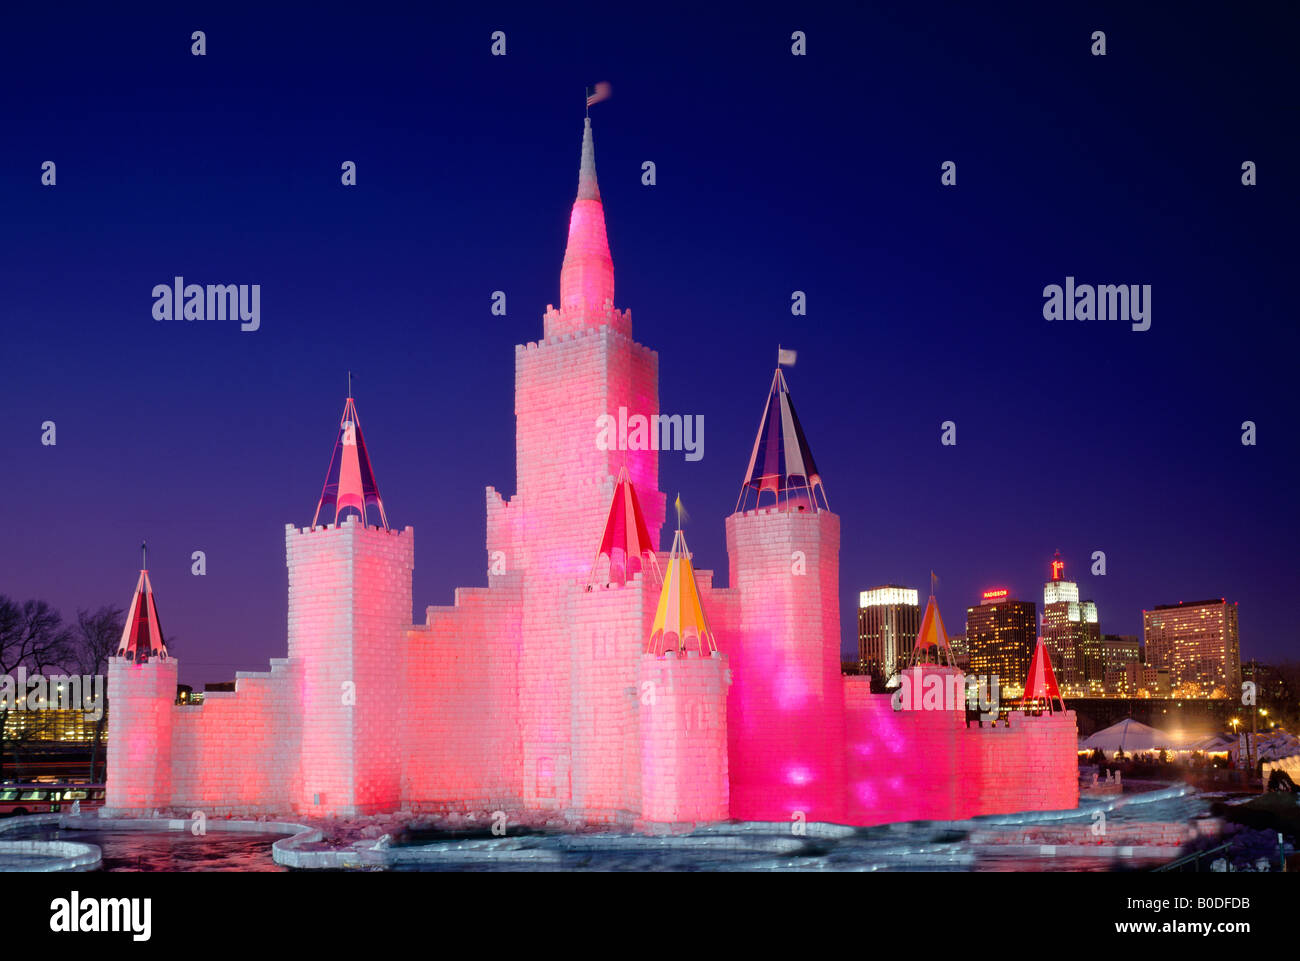 ICE PALACE GLOWS DURING ST. PAUL, MINNESOTA'S ANNUAL WINTER CARNIVAL